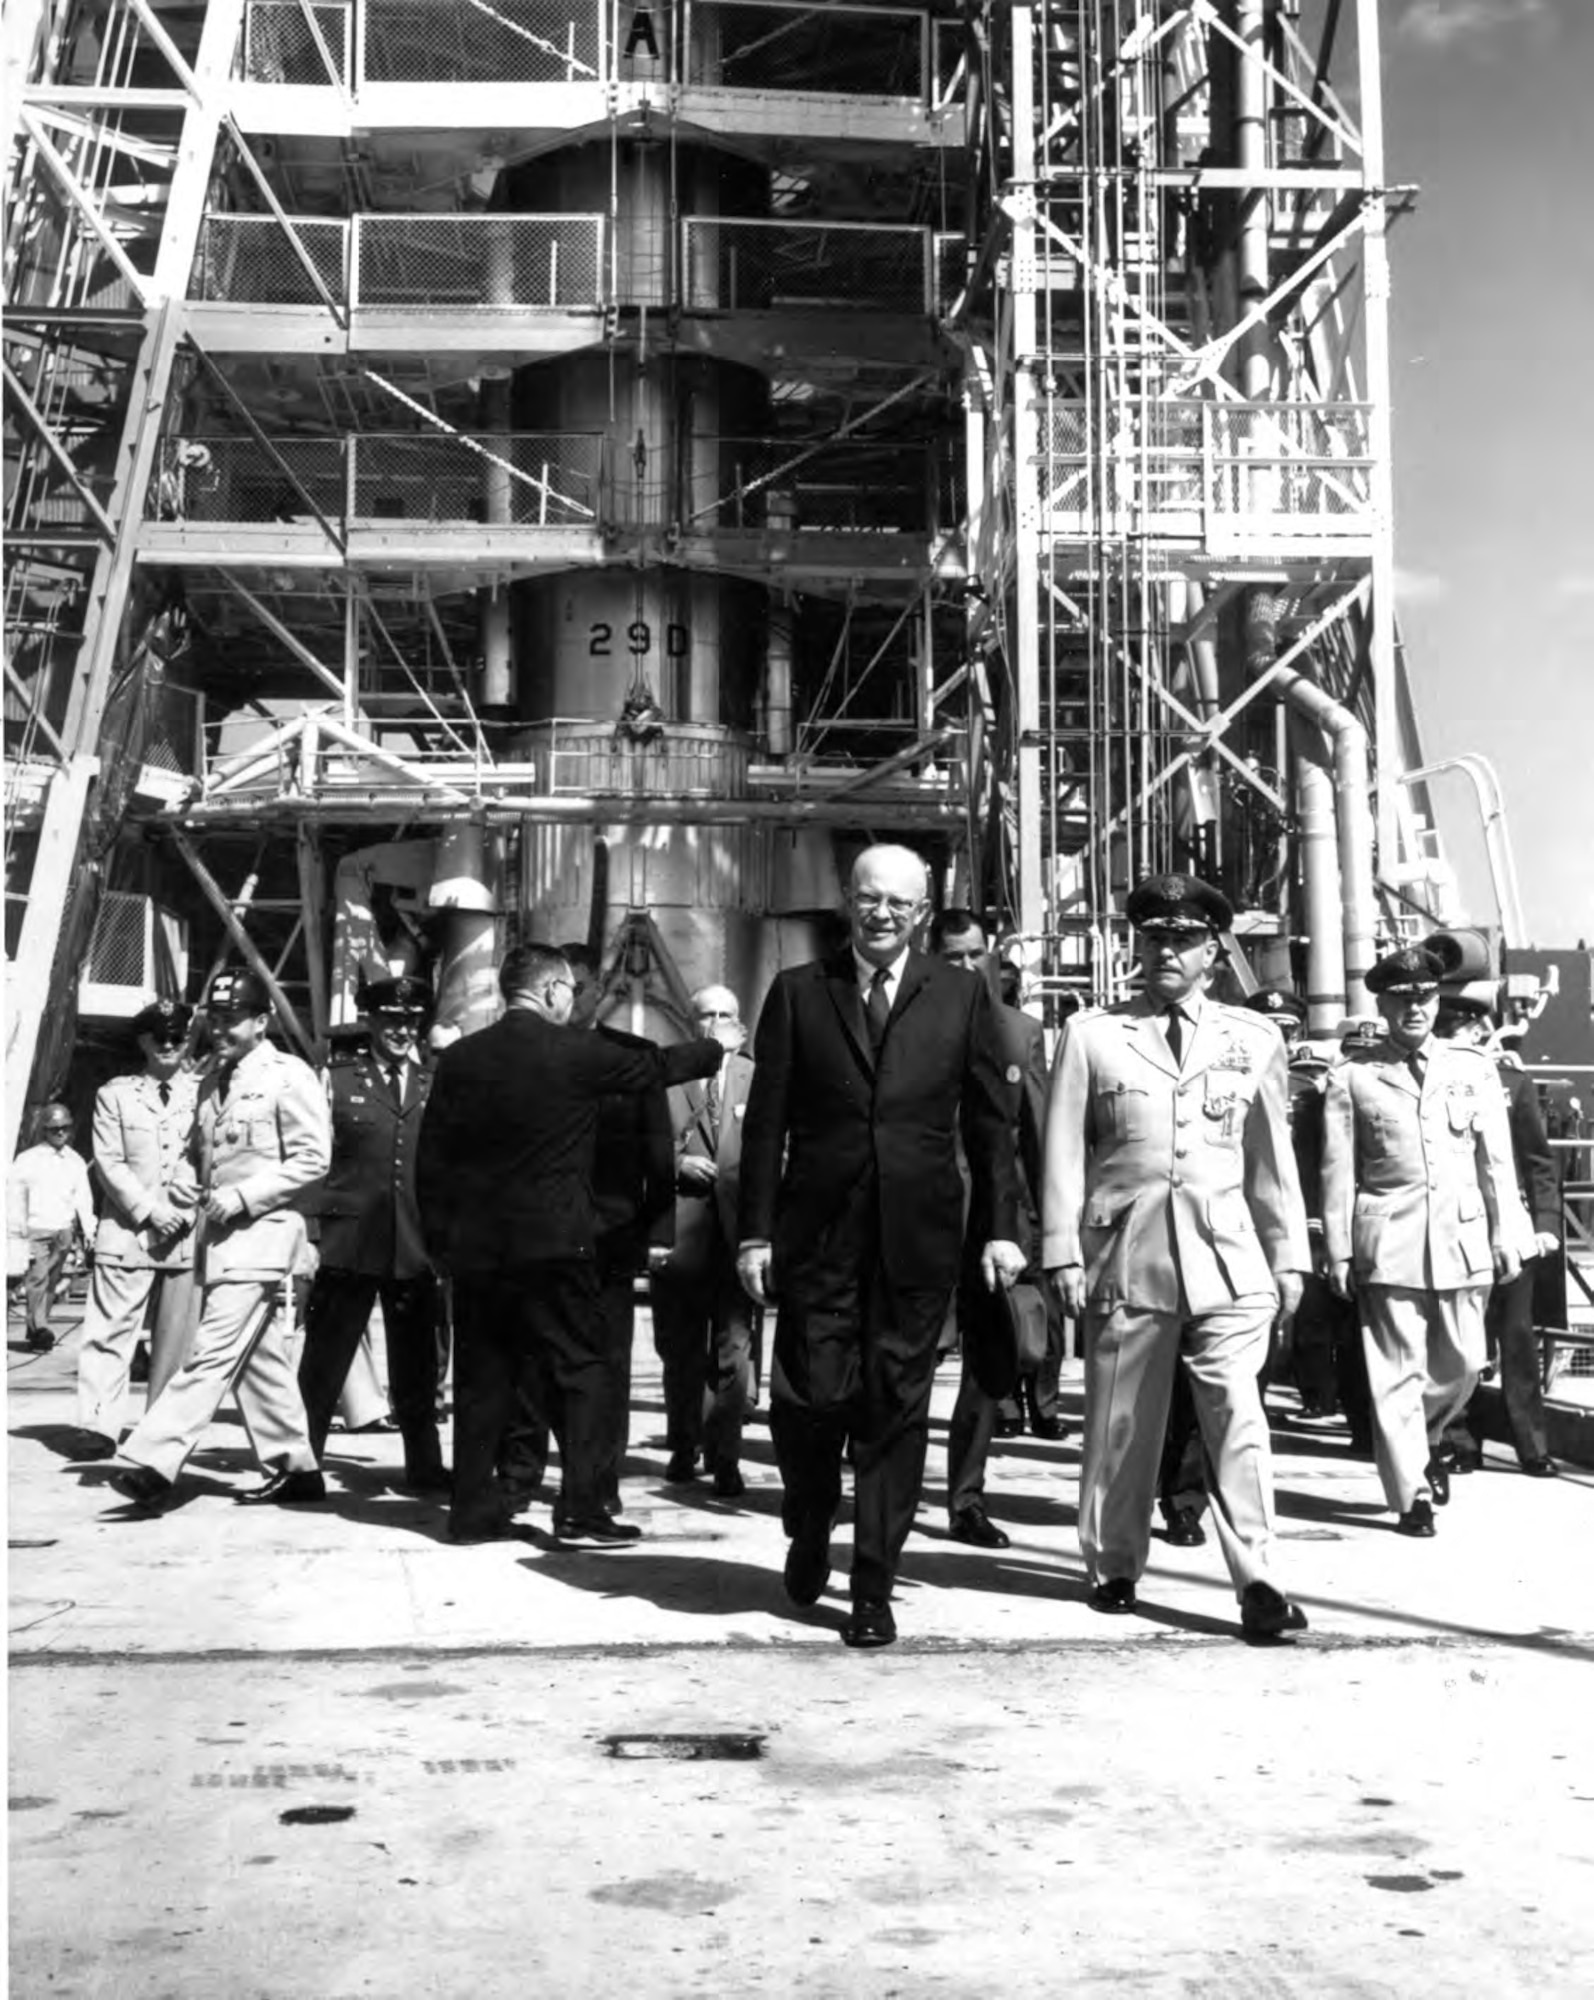 President Dwight D. Eisenhower visits the Eastern Test Range at Cape Canaveral, Fla. in 1960 as the Atlas D29 is being prepared for launch of MIDAS 1, part of the Weapon System 117L. The MIDAS program aimed at developing a satellite that would carry an infrared sensor to detect hostile ICBM launches. Although the first MIDAS satellite failed to achieve orbit in February 1960, a MIDAS satellite under a subsequent test program AFP461 was successfully launched on May 9, 1963. It operated long enough to detect nine missile launches, thereby contributing to the series of test flights which served to demonstrate the system's increasing reliability and longevity. (U.S. Air Force photo)